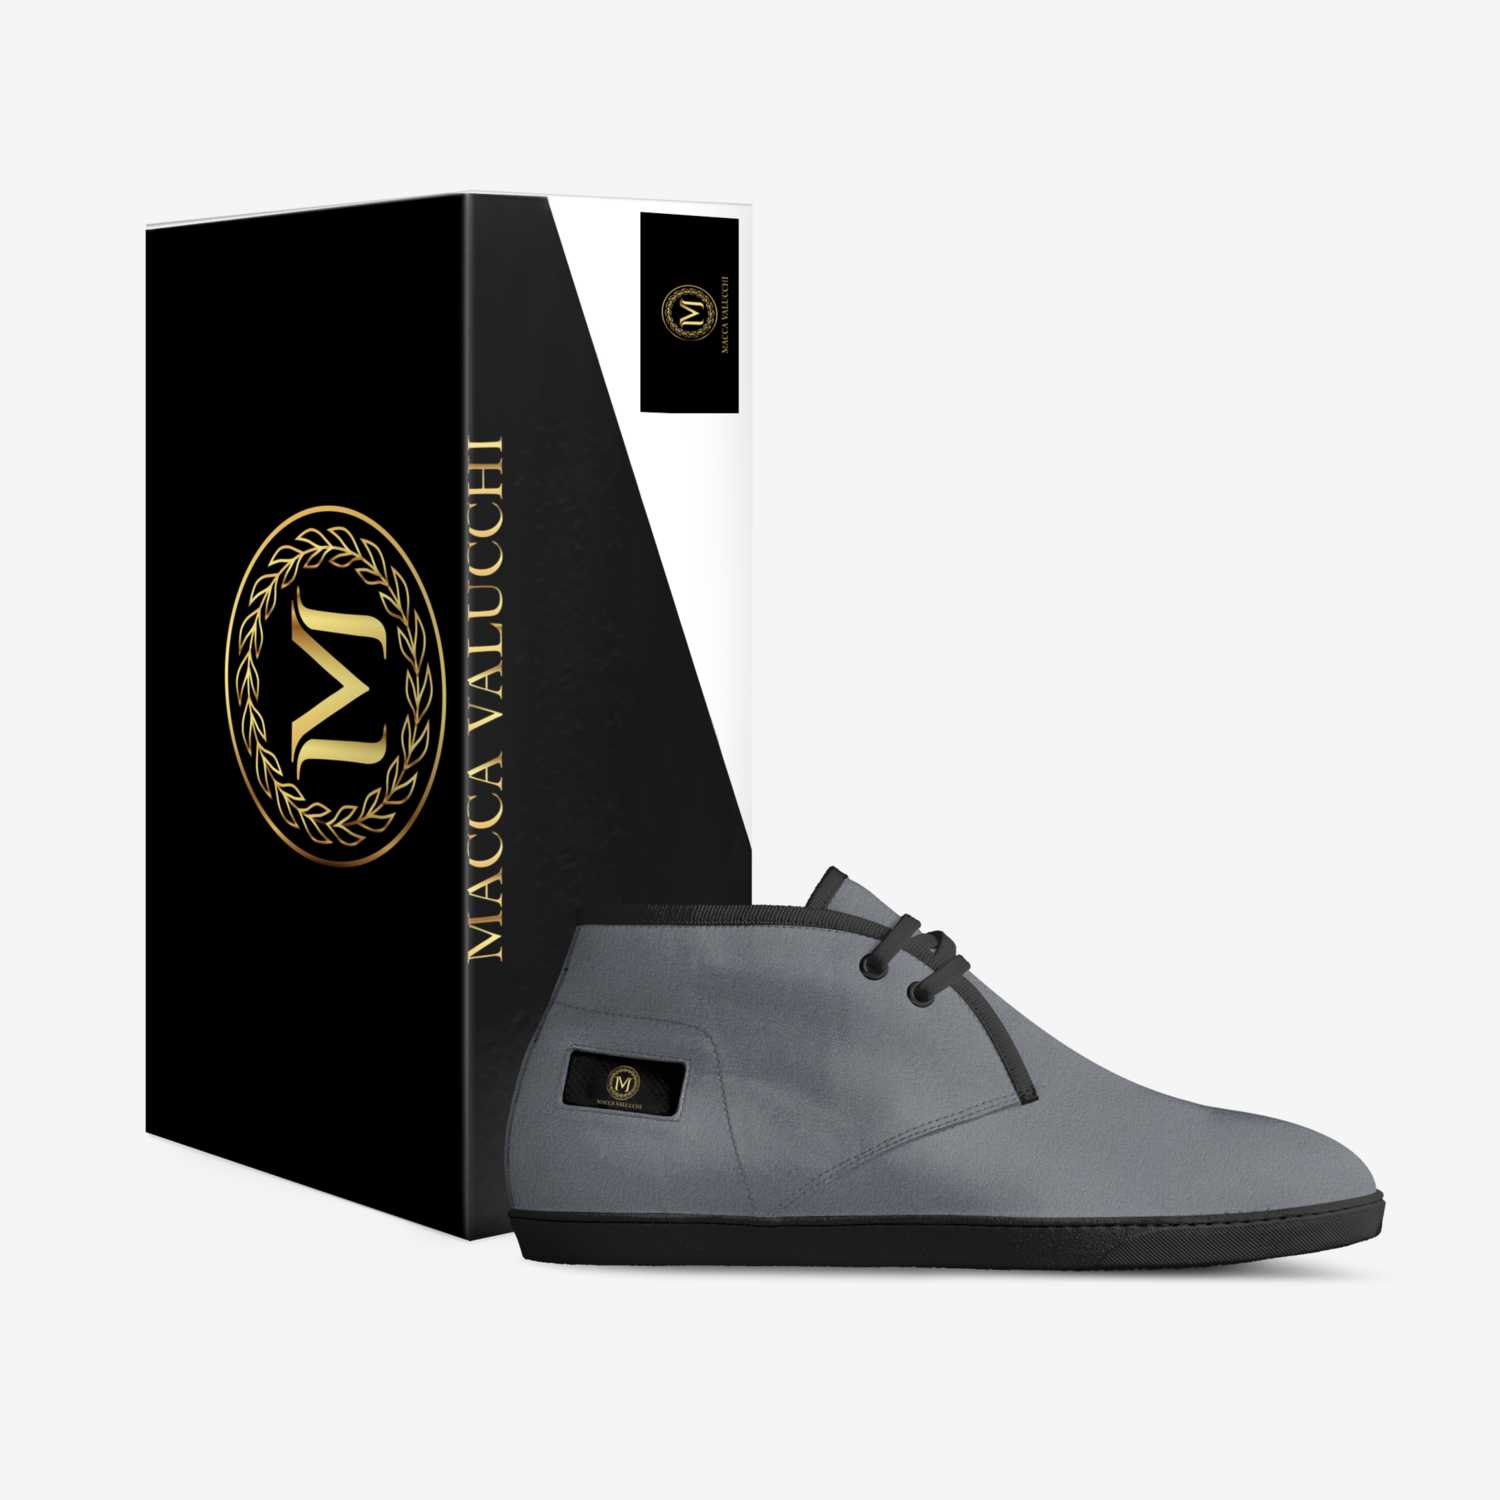 MACCA VALUCCHI custom made in Italy shoes by M M | Box view